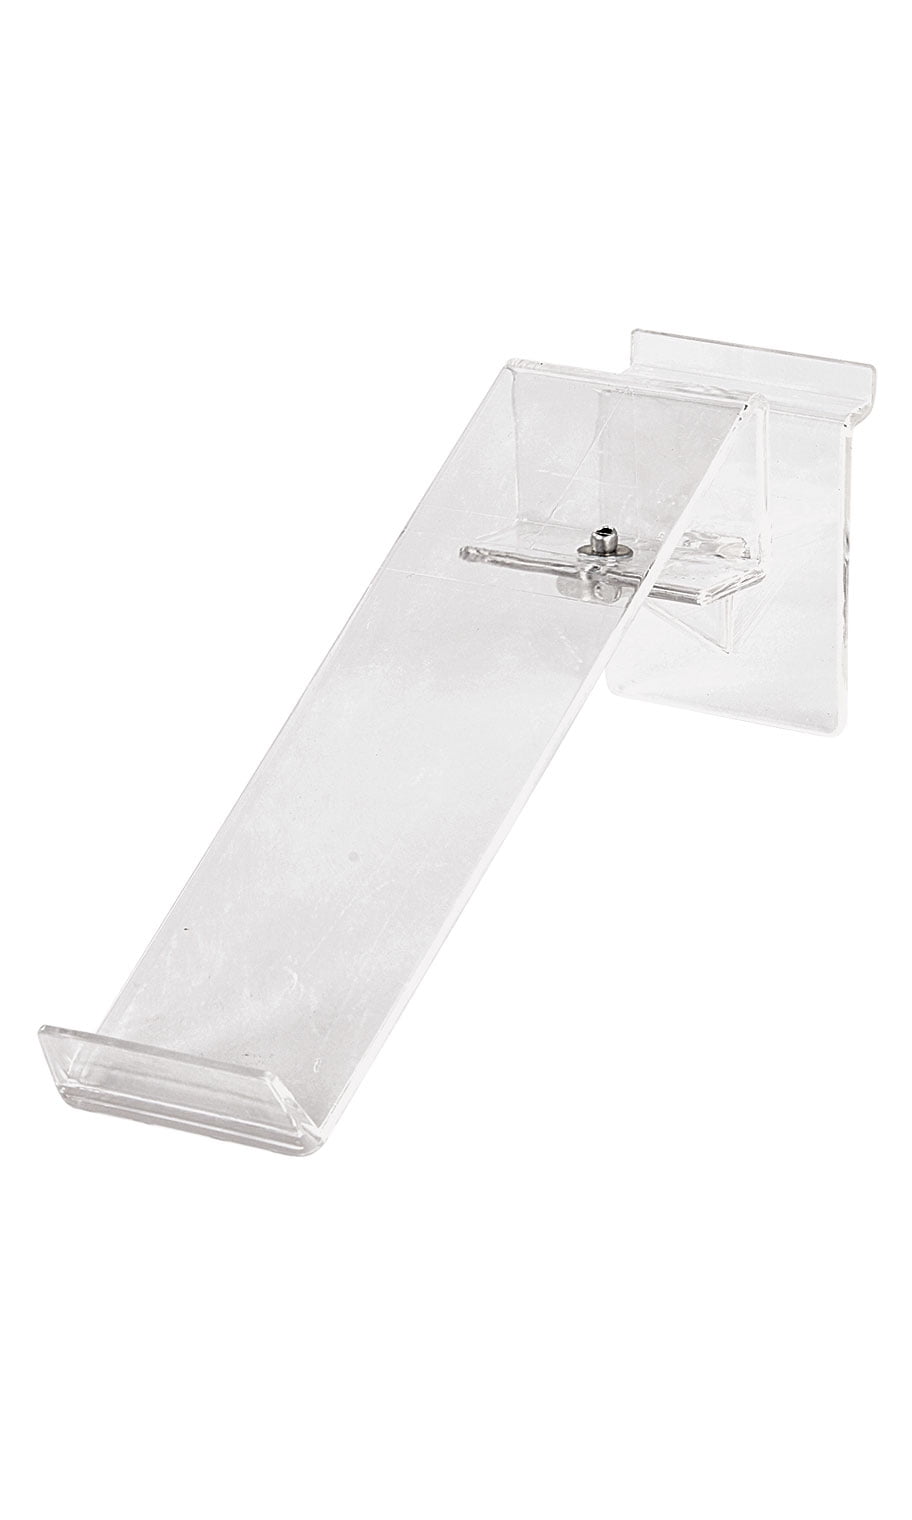 Clear Acrylic Toe-Hold Swivel Shoe Display for Slatwall or Wire Grid ...